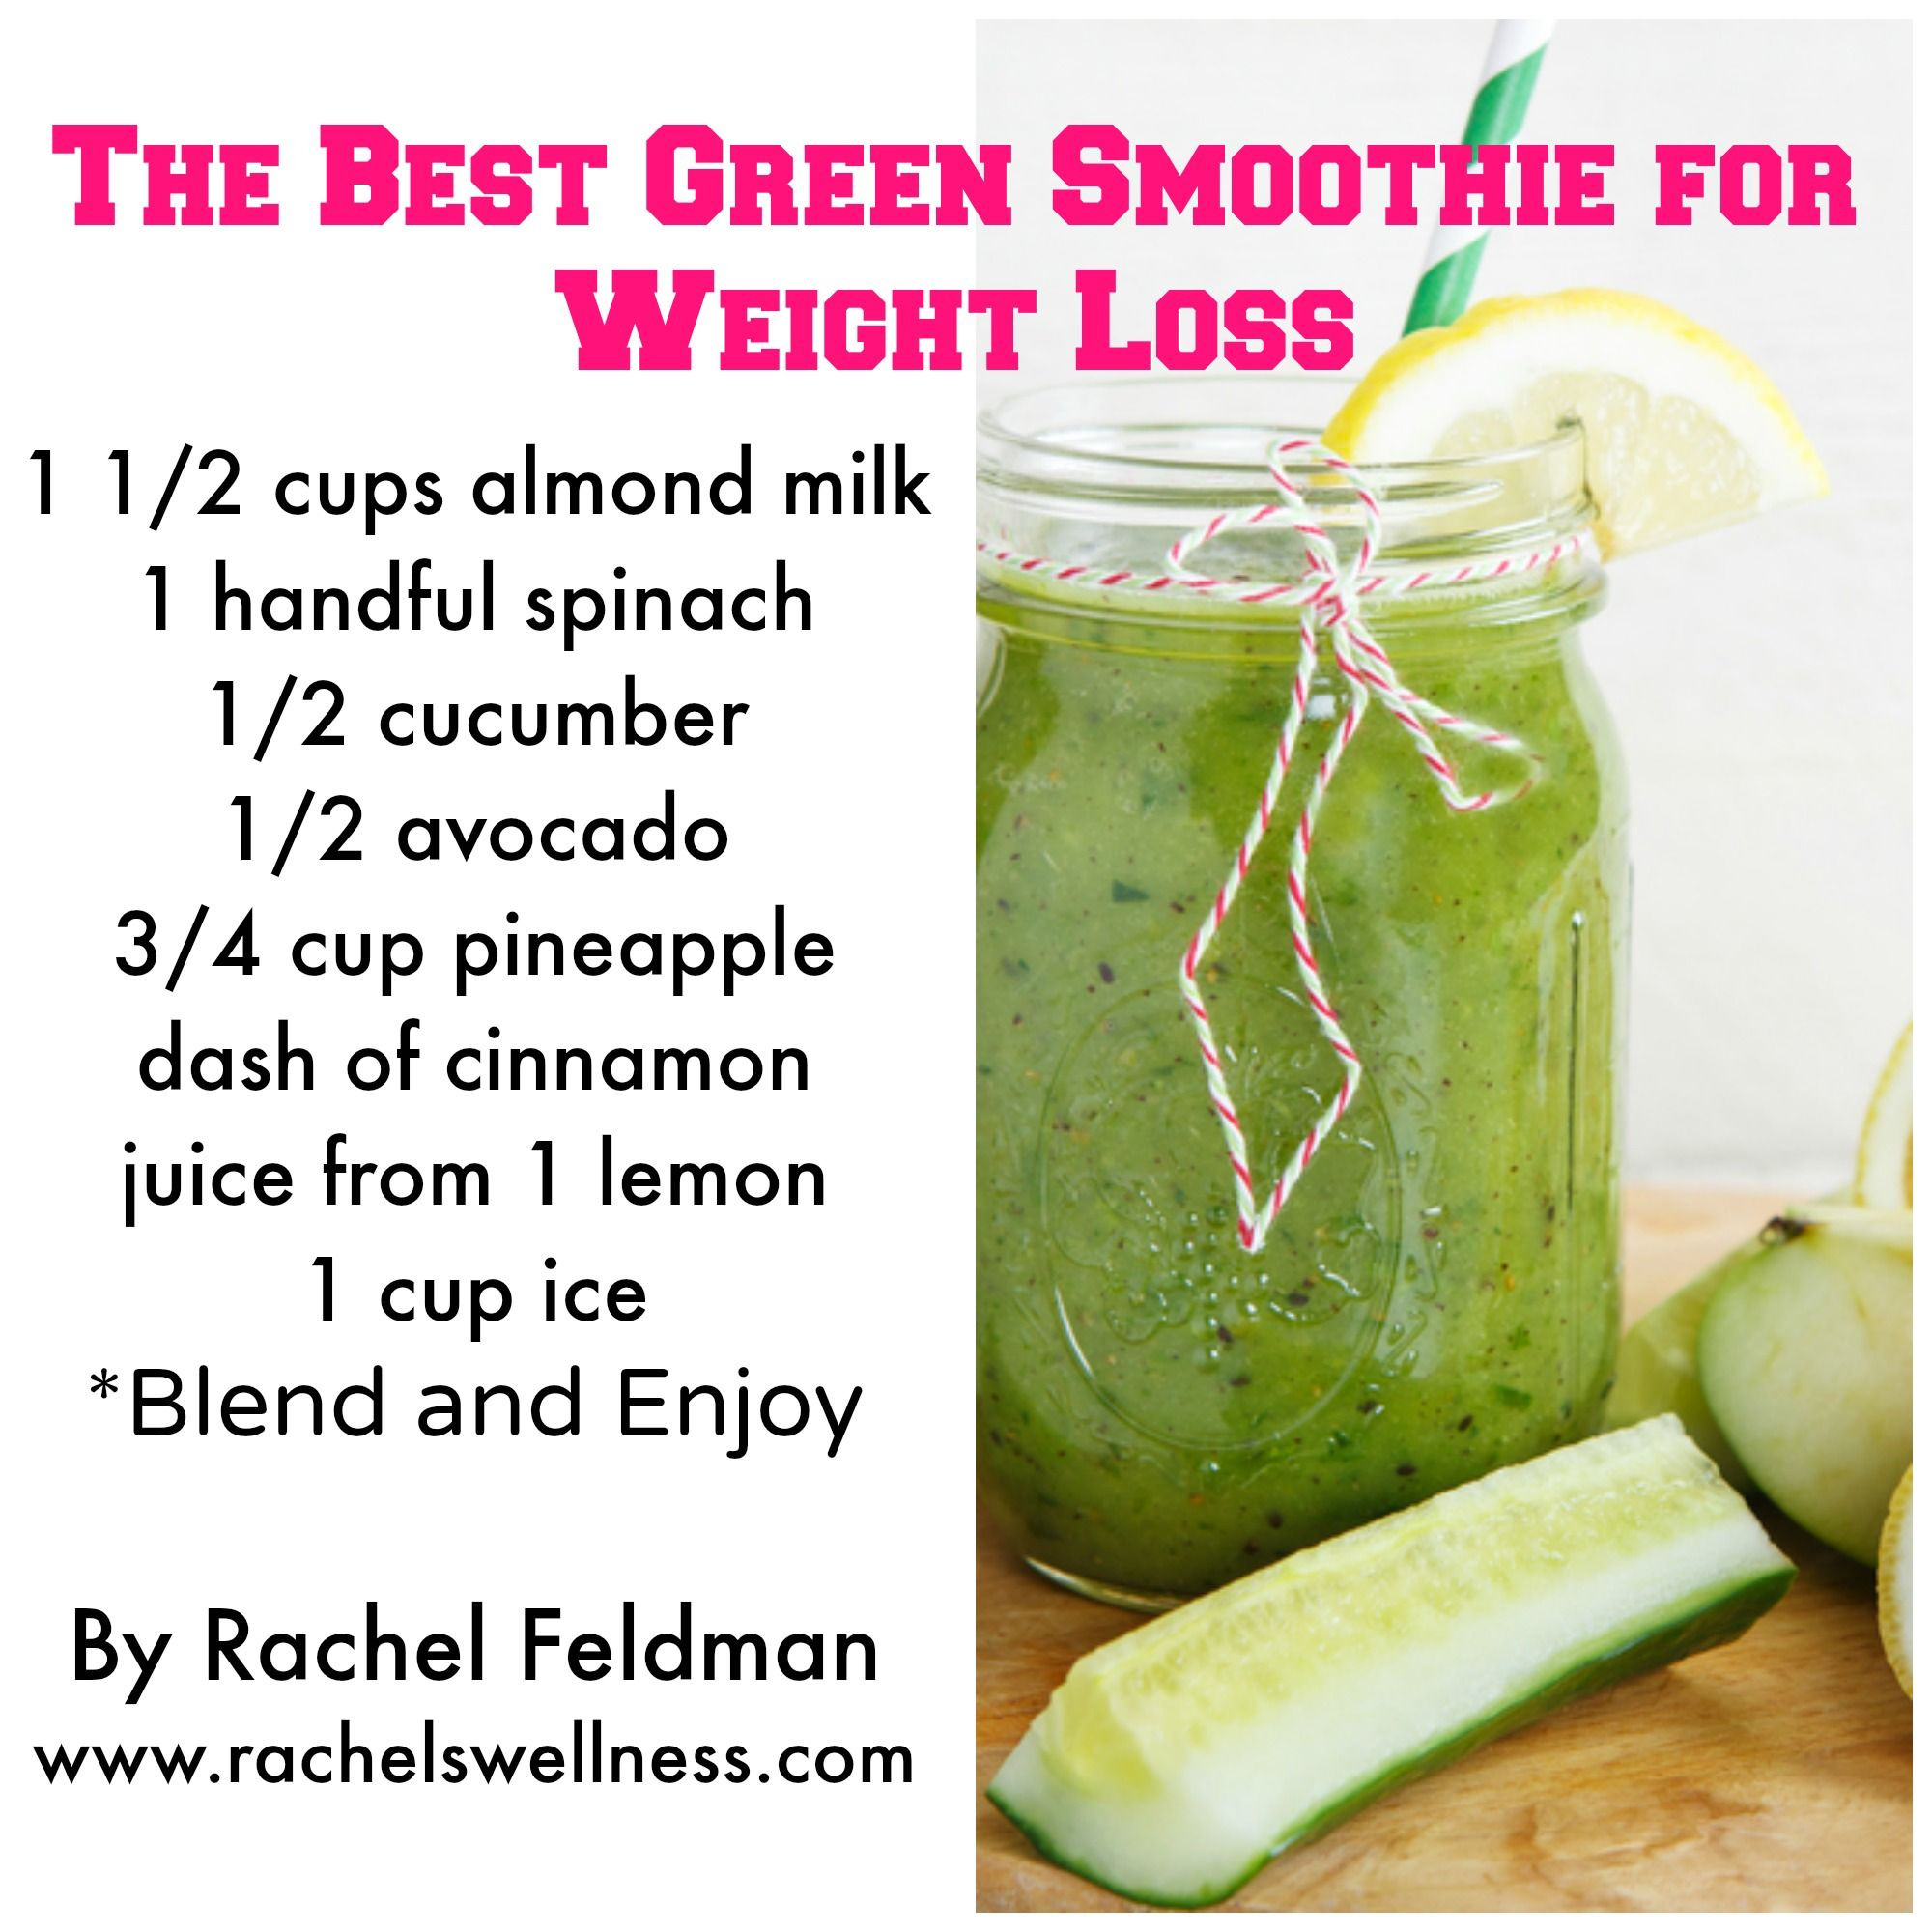 Fruit Smoothie Recipes For Weight Loss
 7 Healthy Green Smoothie Recipes For Weight Loss